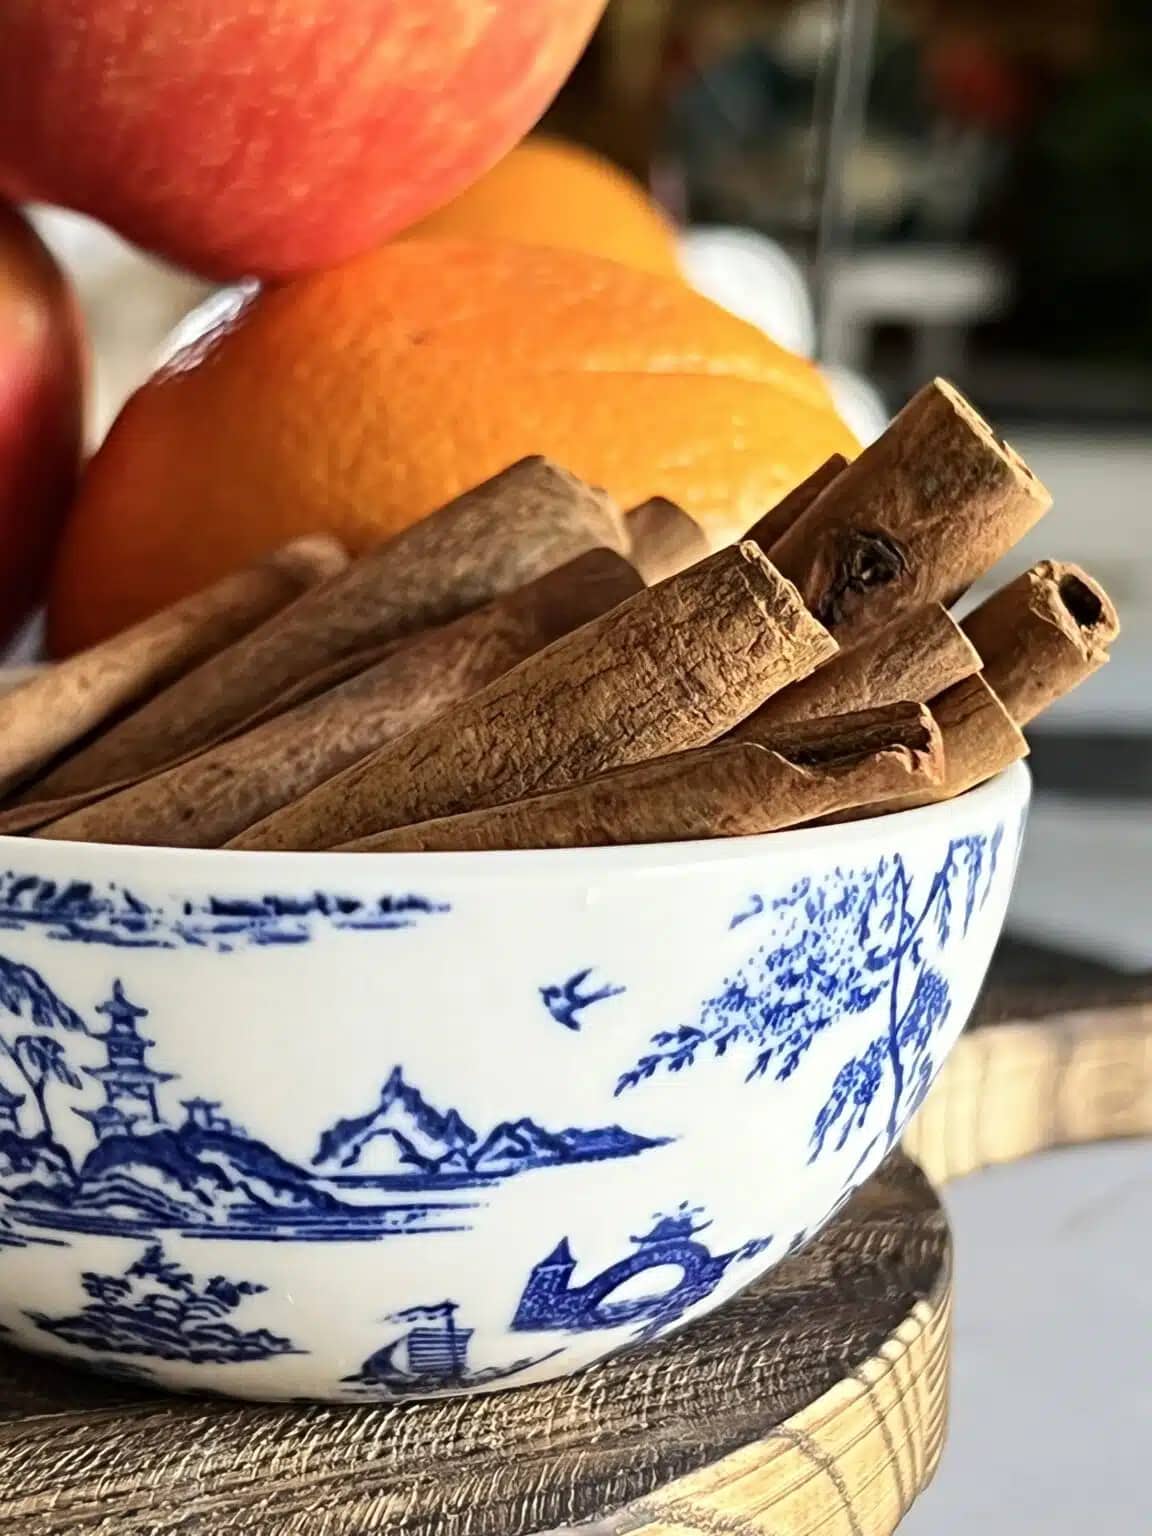 fall fruits and spices in blue and white bowl